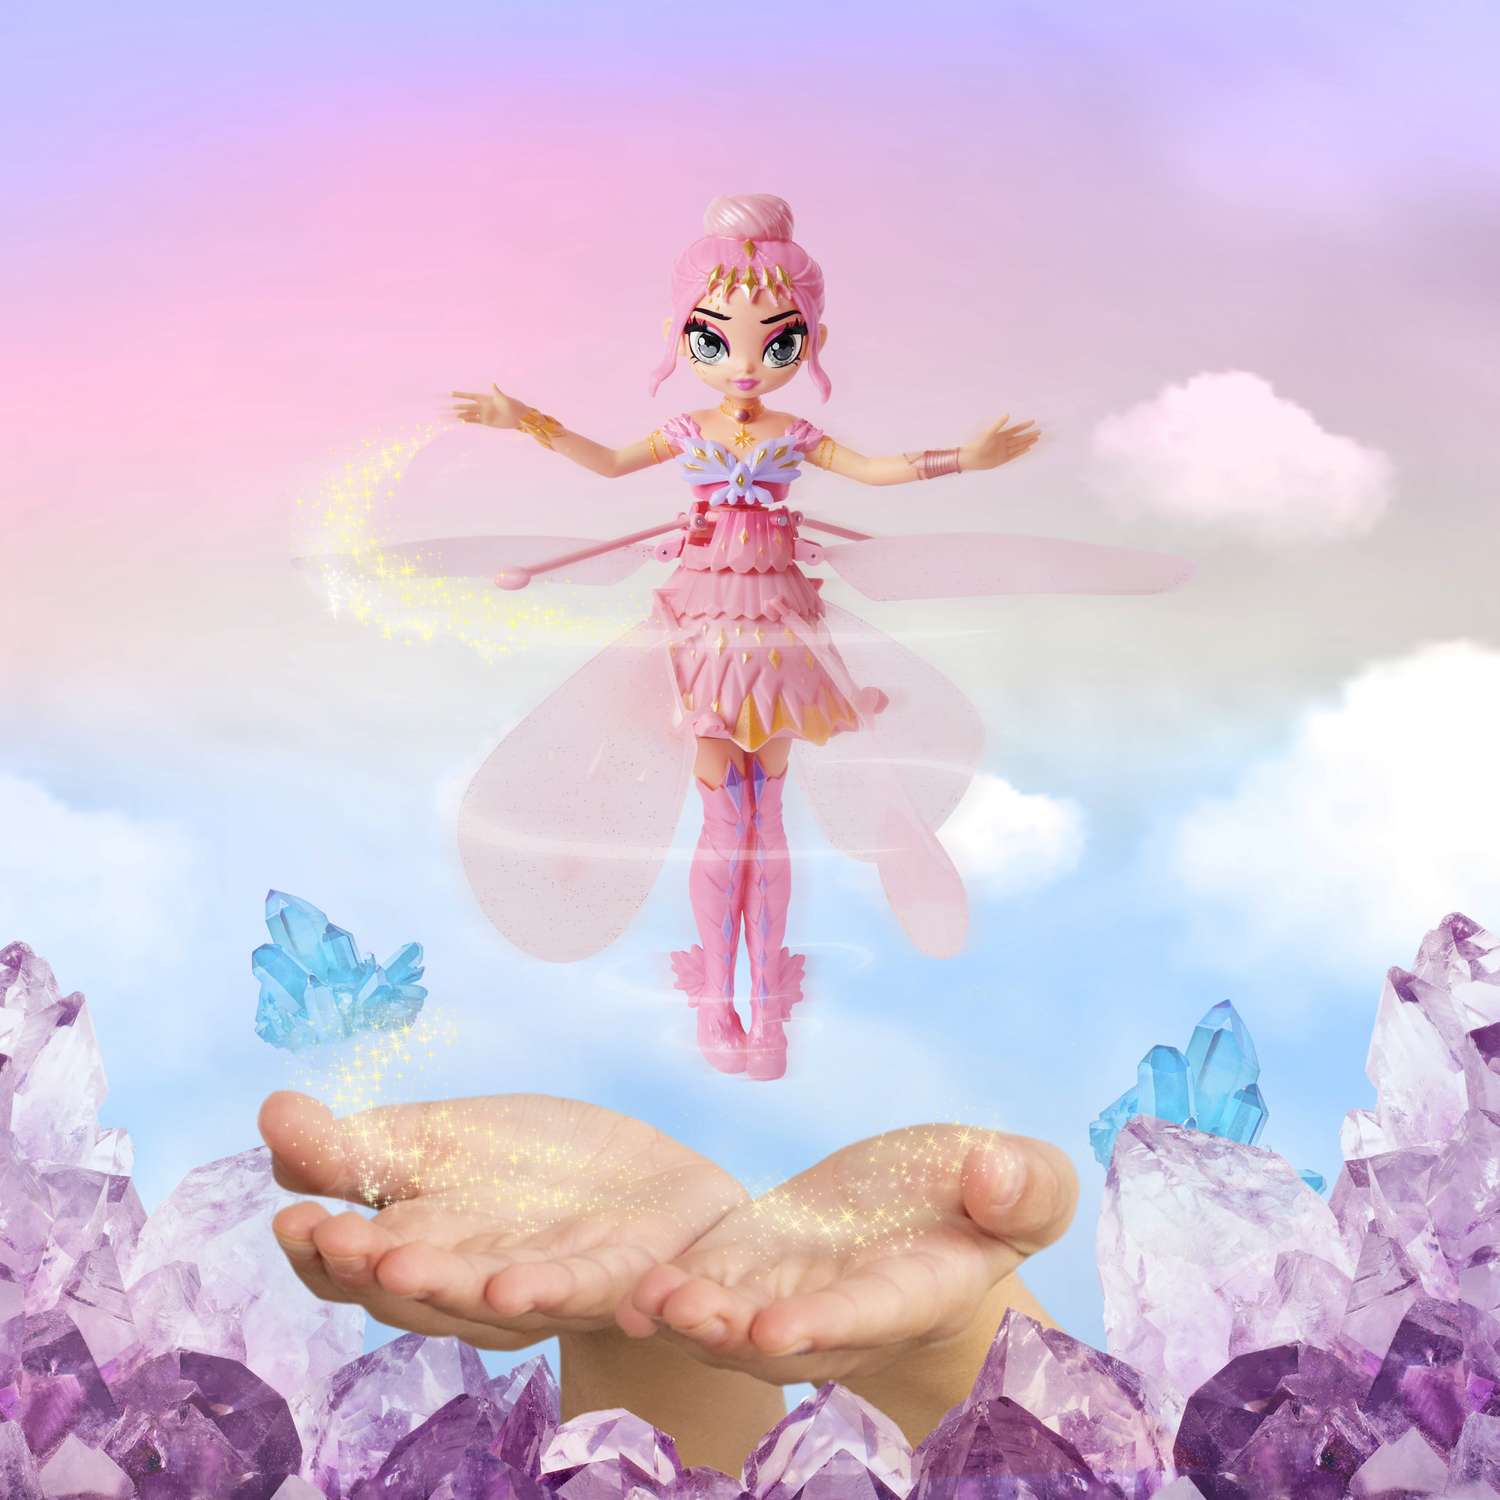 Fairy Dress Up Games For Girls